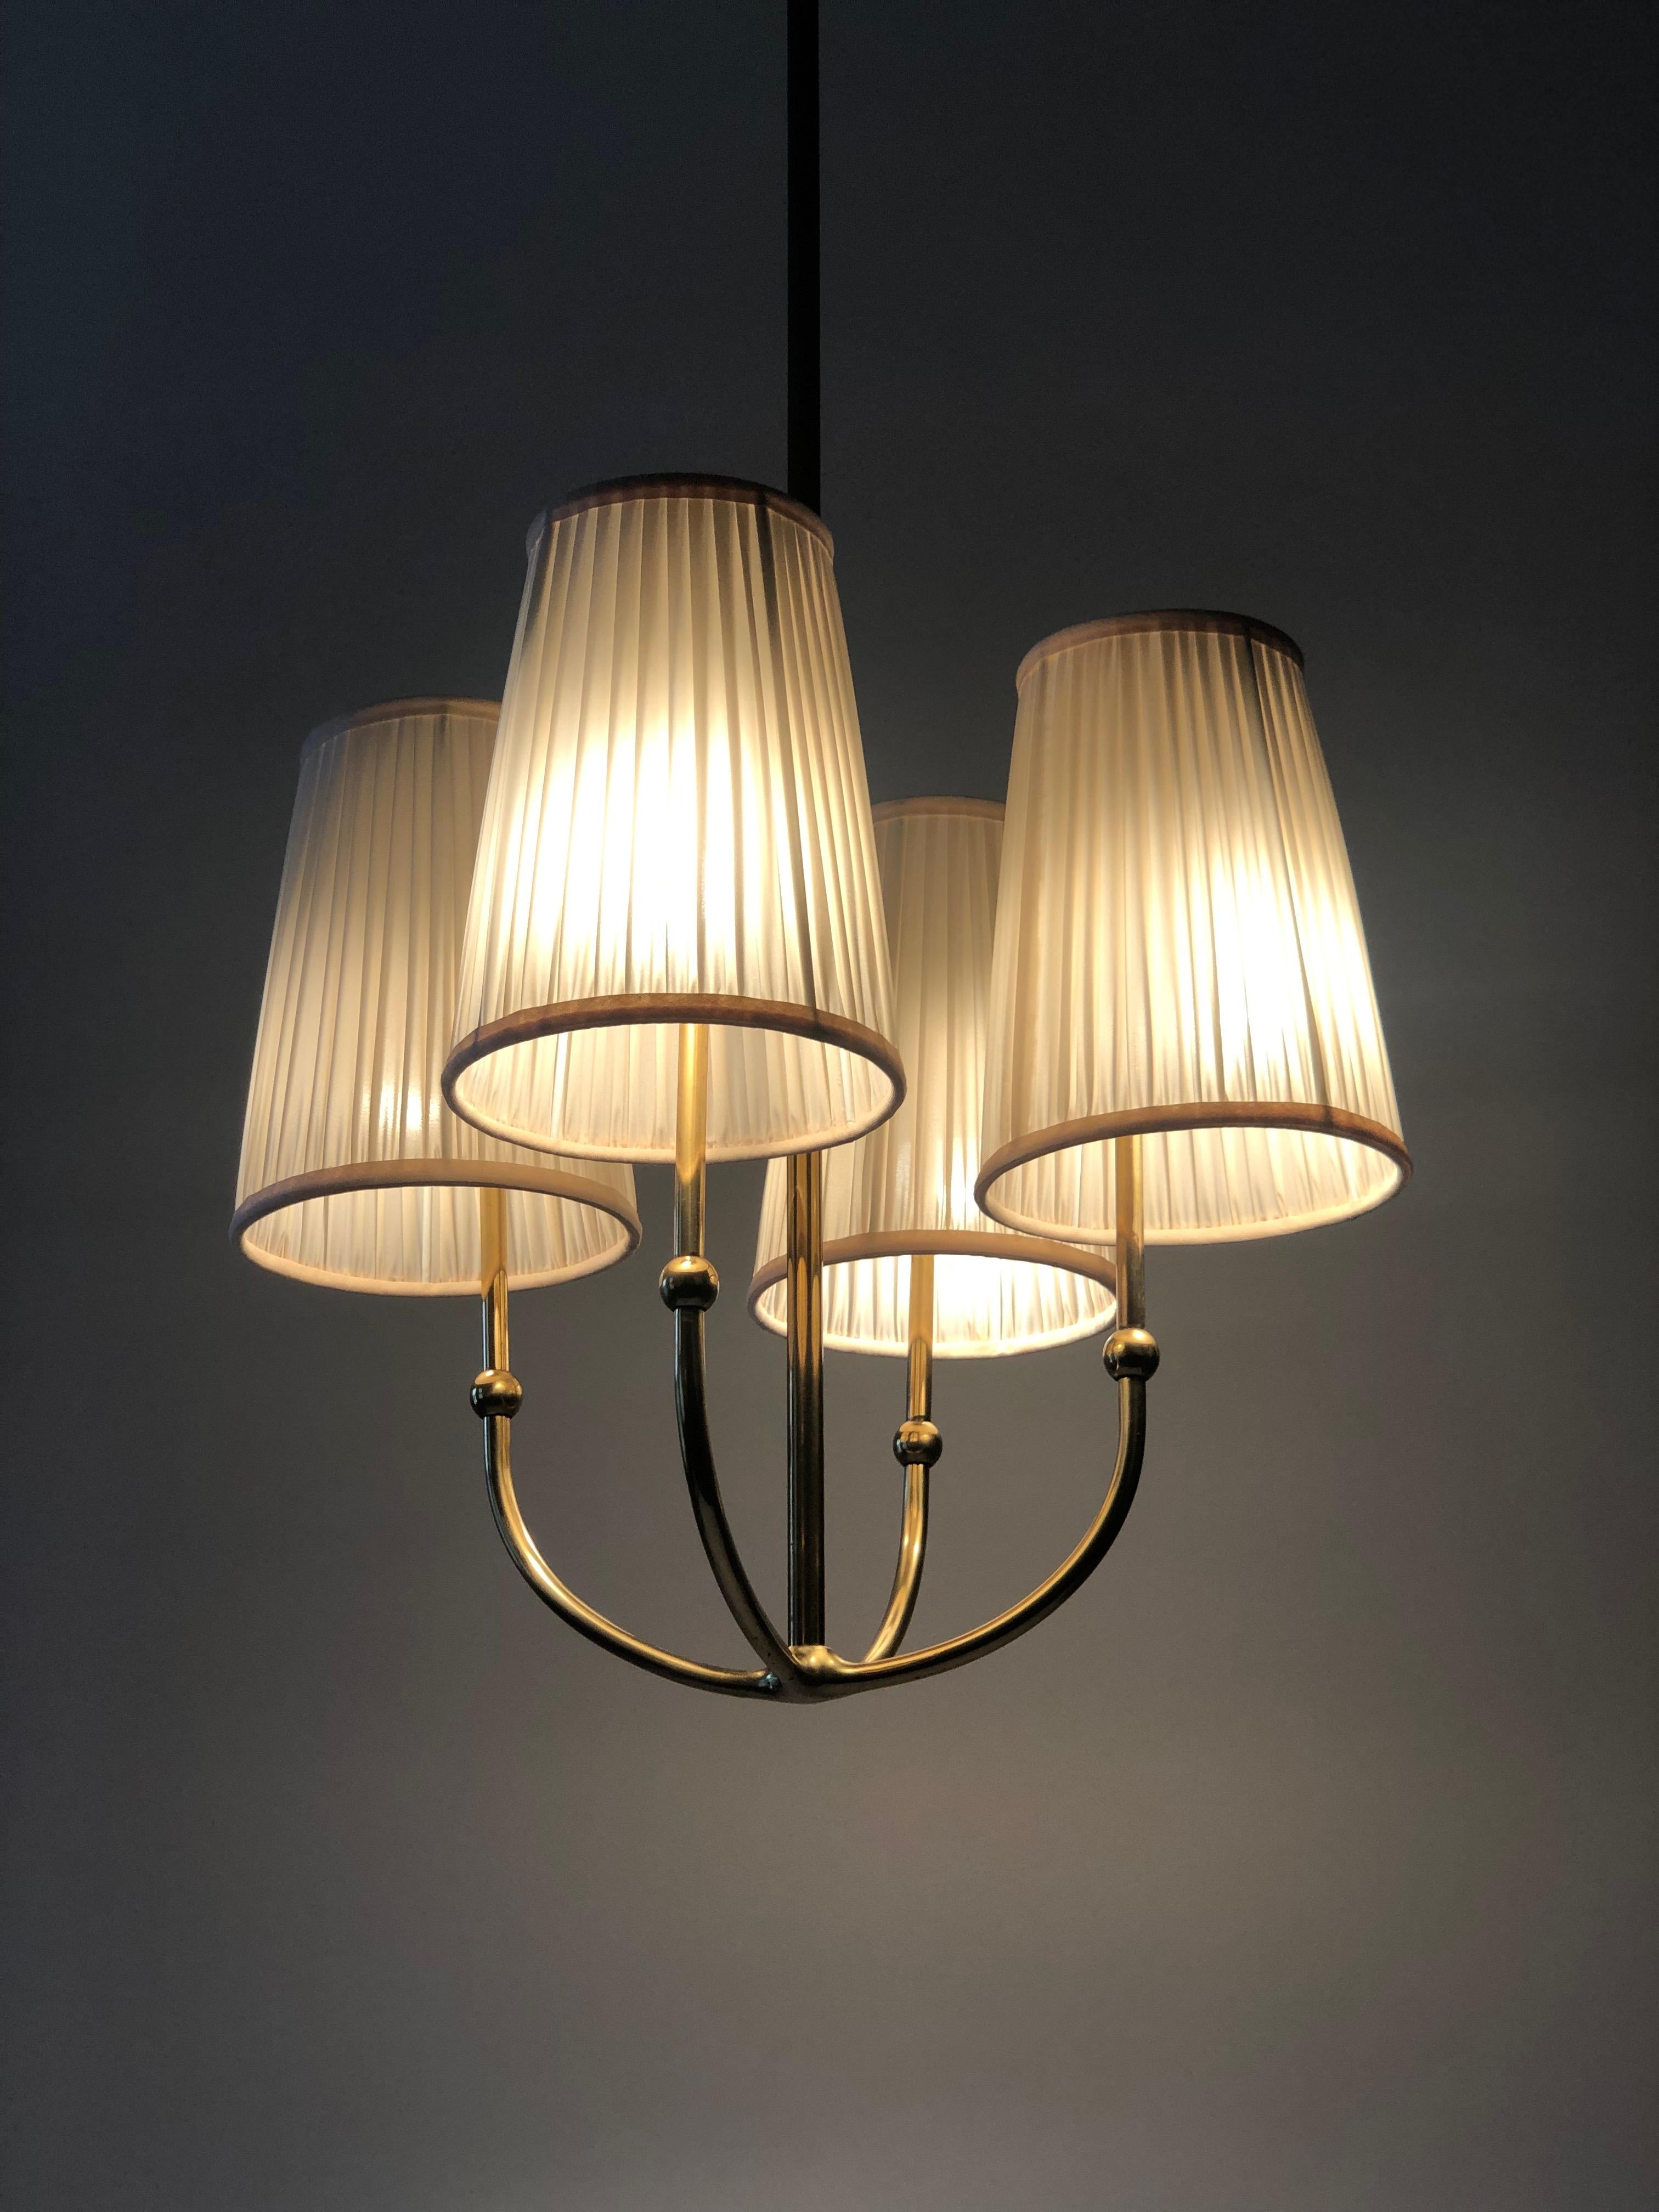 Four Arm Chandelier in Brass with Silk Shades , 1930's, Austria For Sale 1